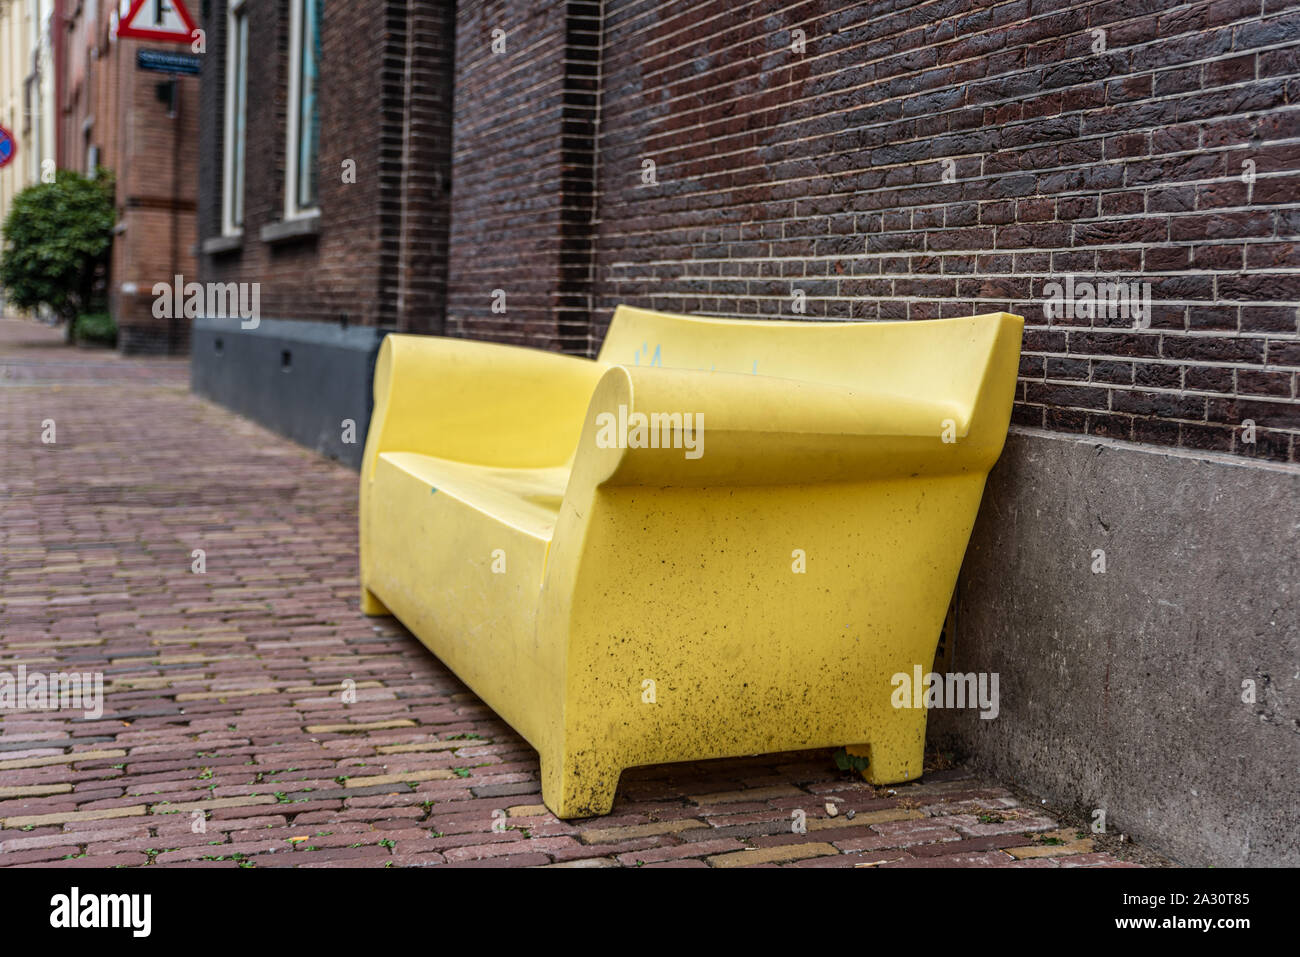 yellow bench canape as street furniture in the street against a brick wall on a brick pavement Stock Photo